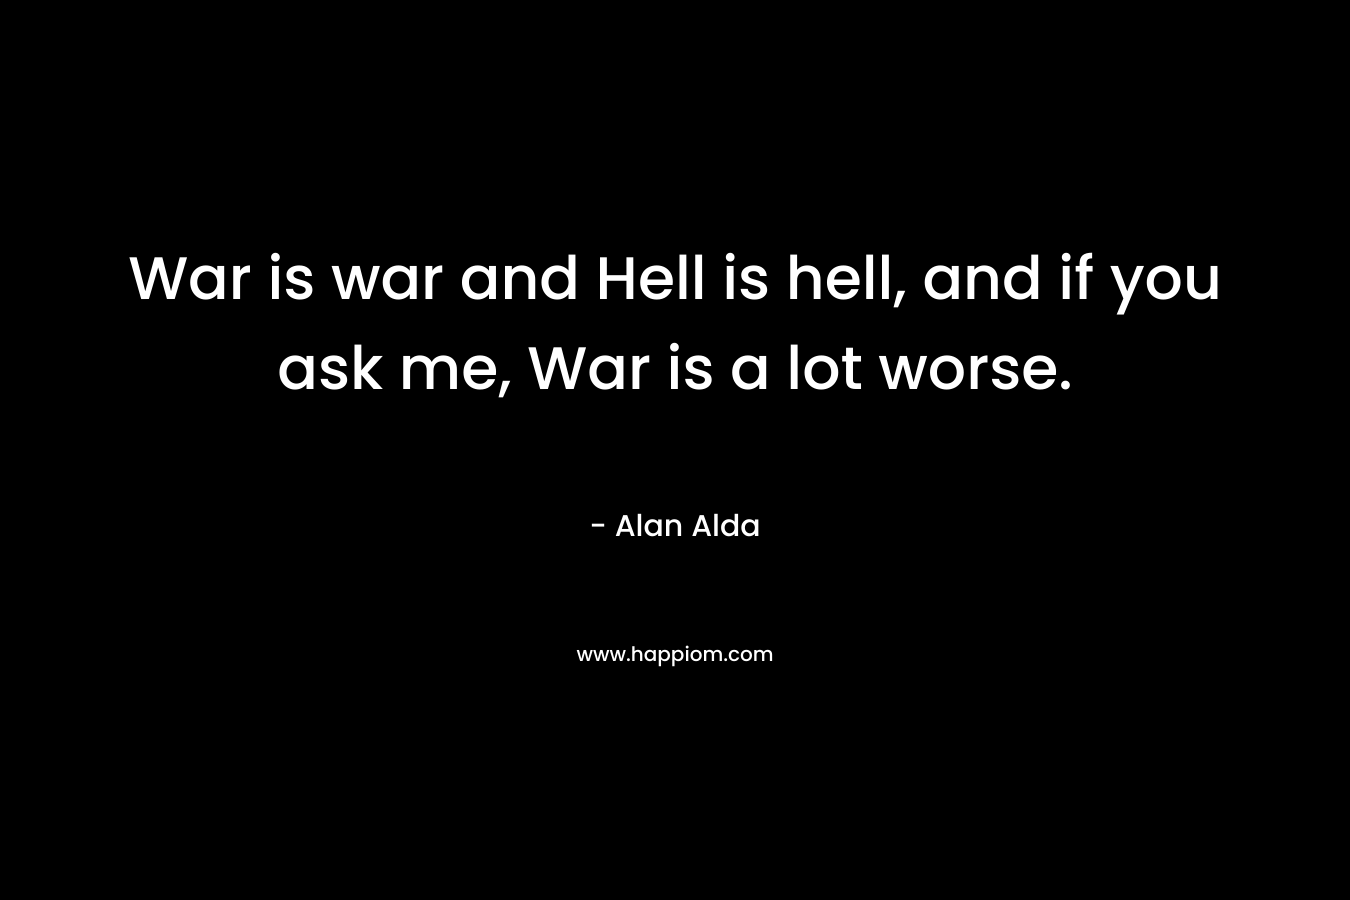 War is war and Hell is hell, and if you ask me, War is a lot worse.